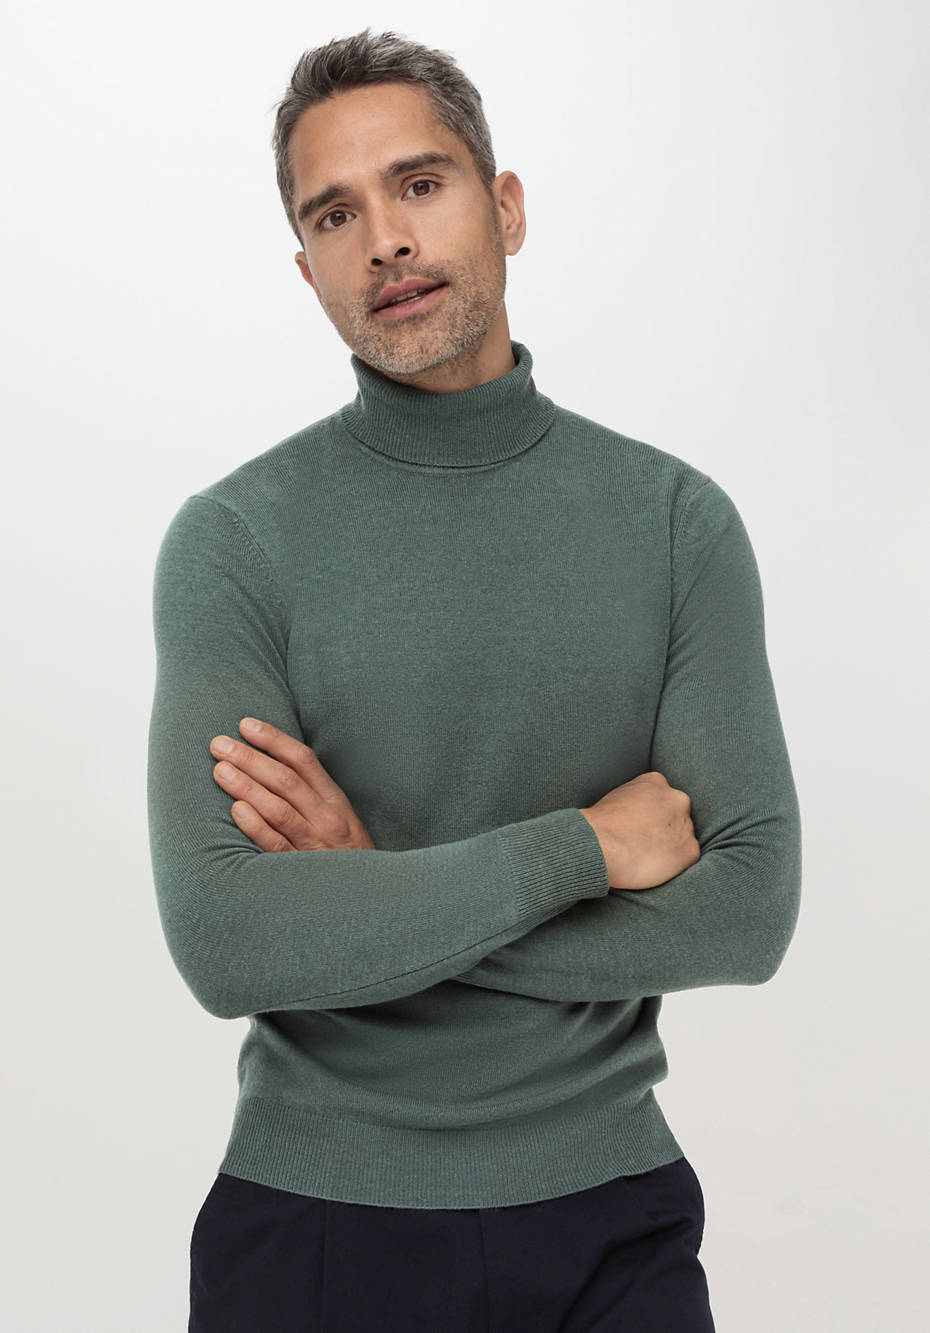 Regular turtleneck sweater made of virgin wool with cashmere